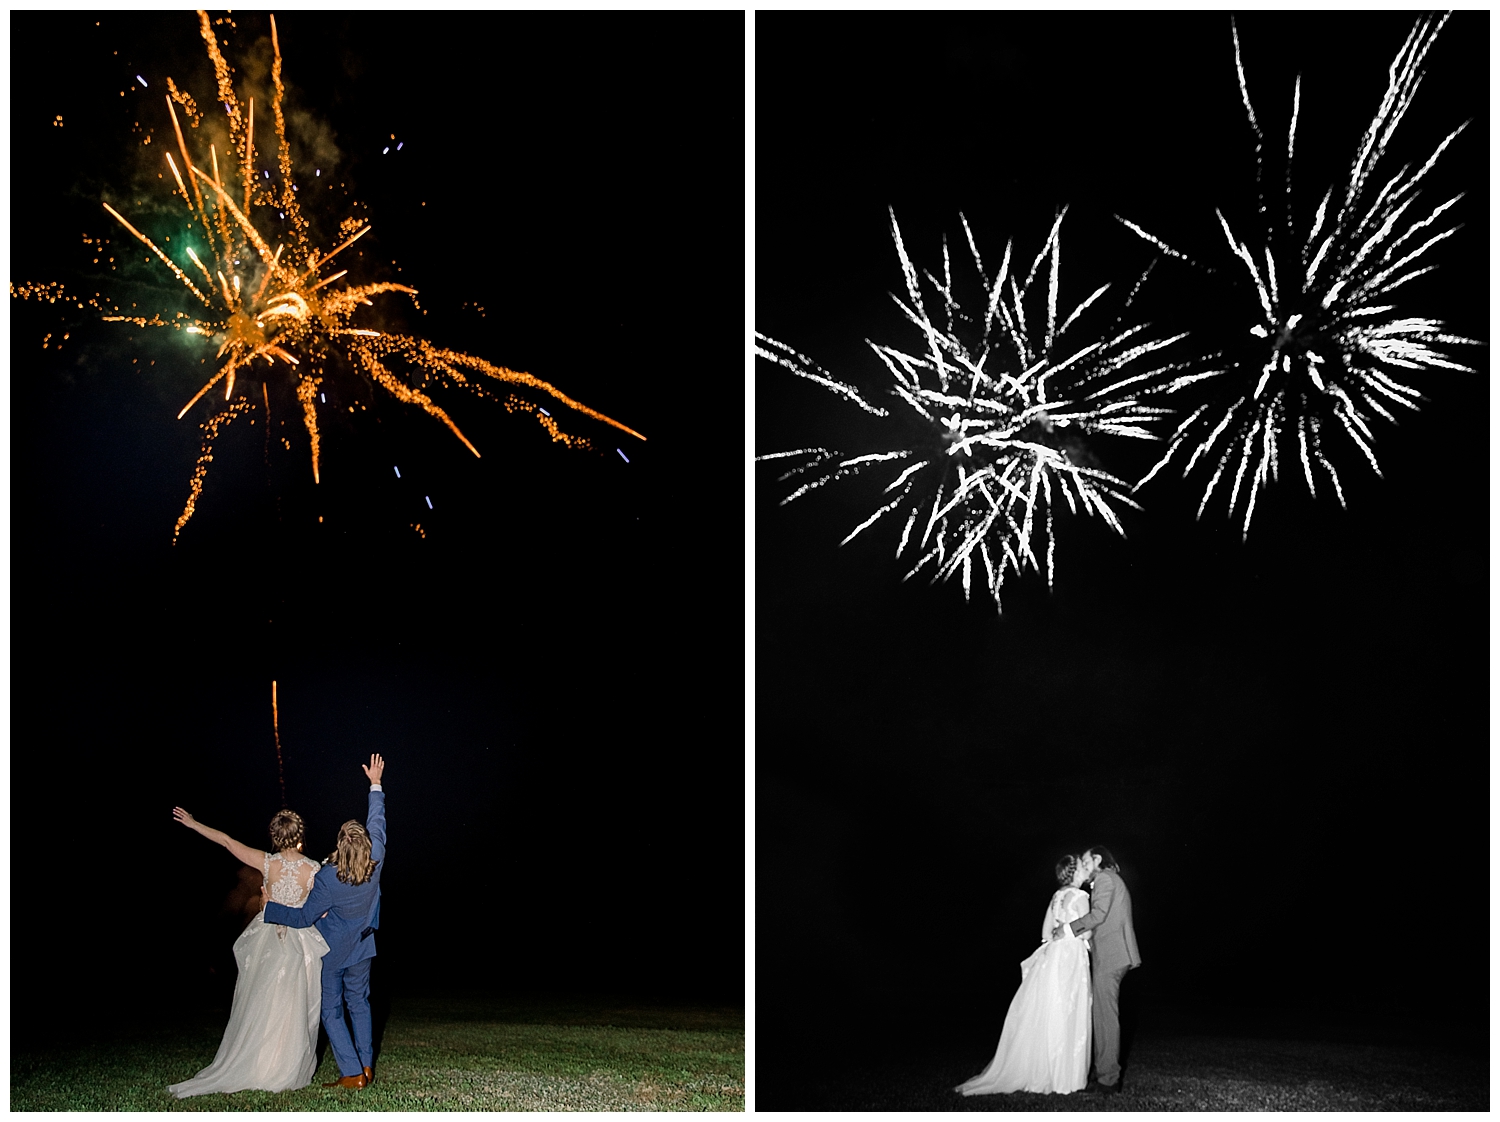 Fireworks at a Goffstown, New Hampshire wedding at a private estate. Photography by Halie Olszowy.